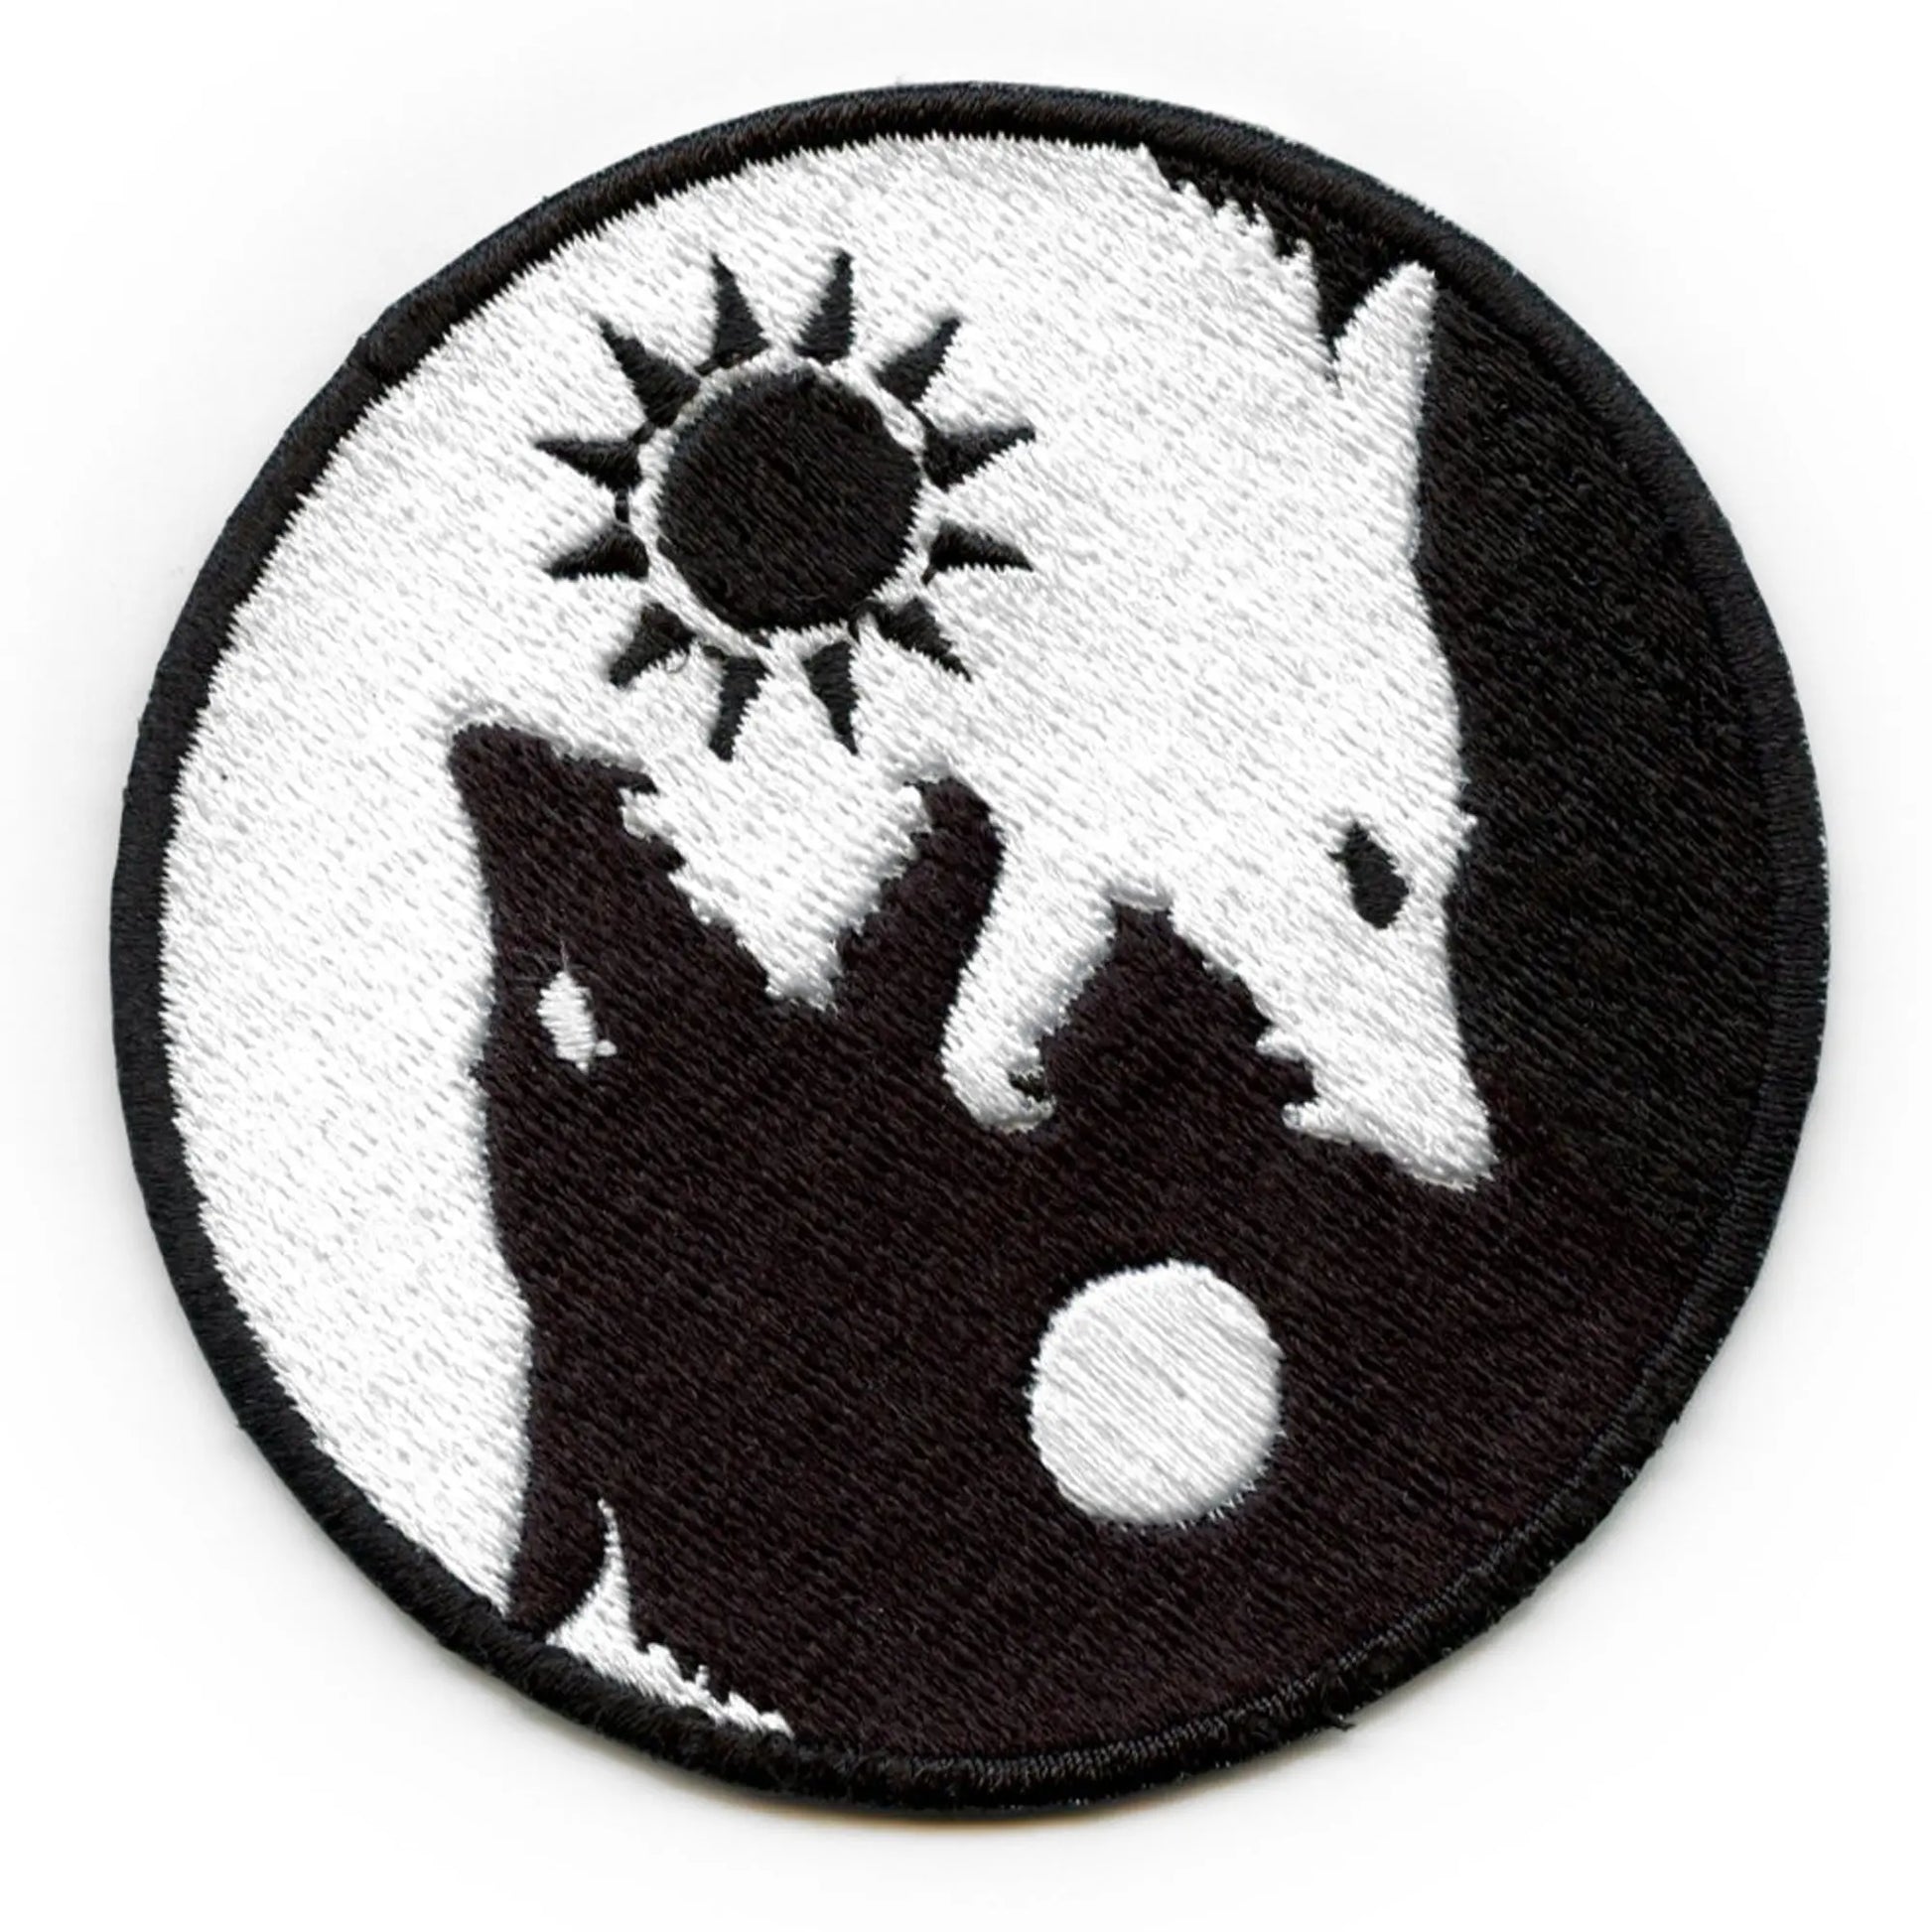 File:China police patch 02.jpg - Wikimedia Commons